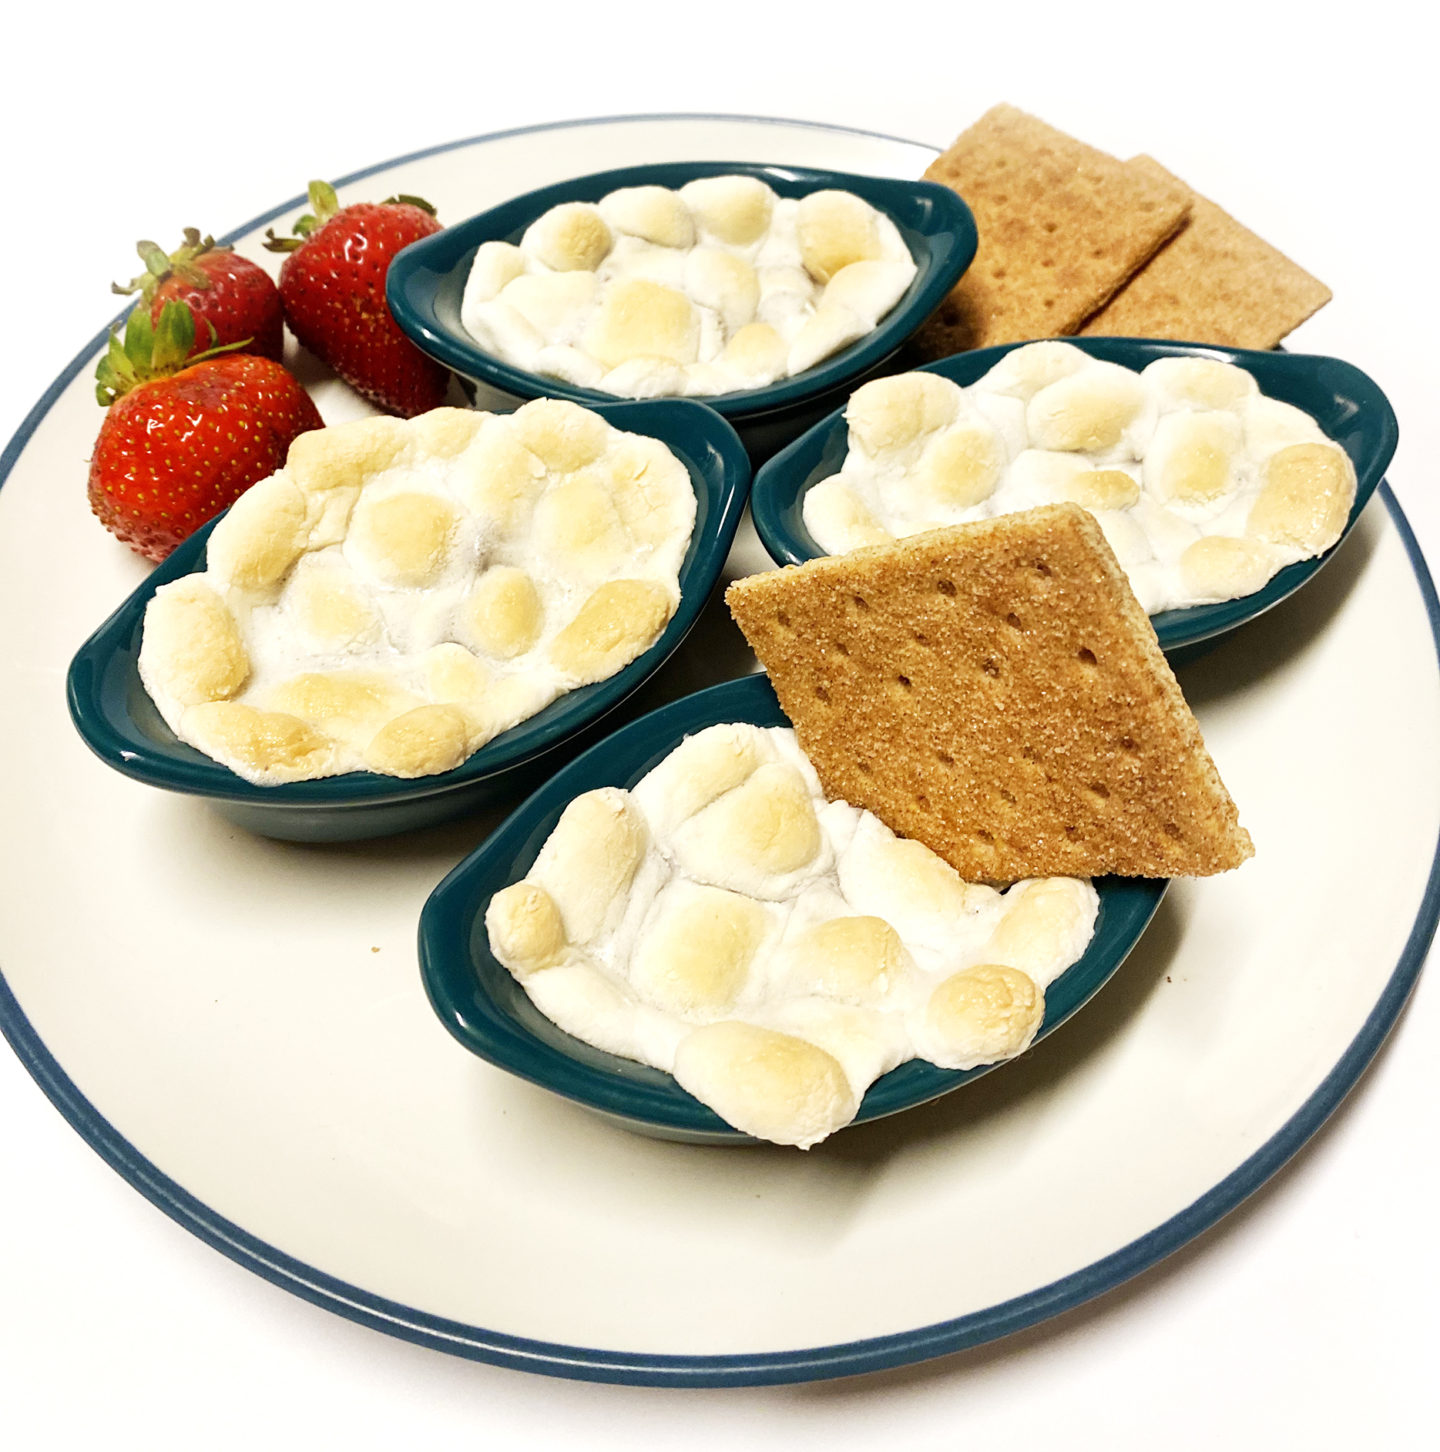 s'mores dessert dip with graham crackers and strawberries 